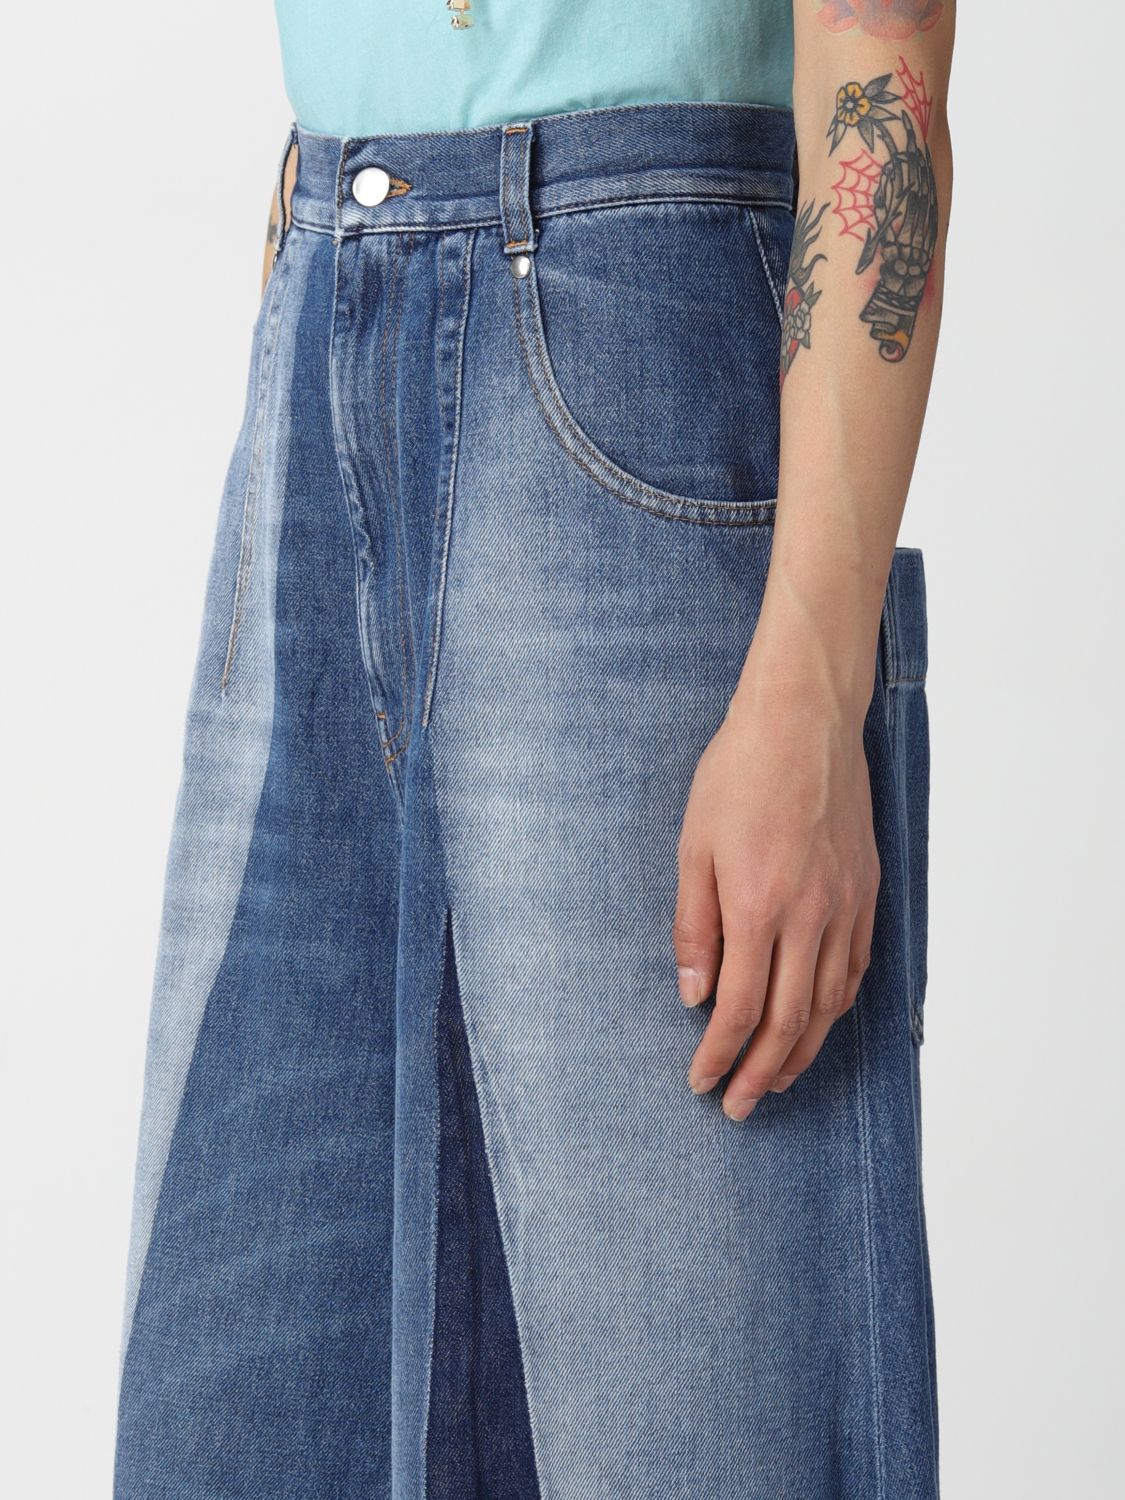 Jeans Circus Hotel: Circus Hotel cropped jeans in washed denim denim 3